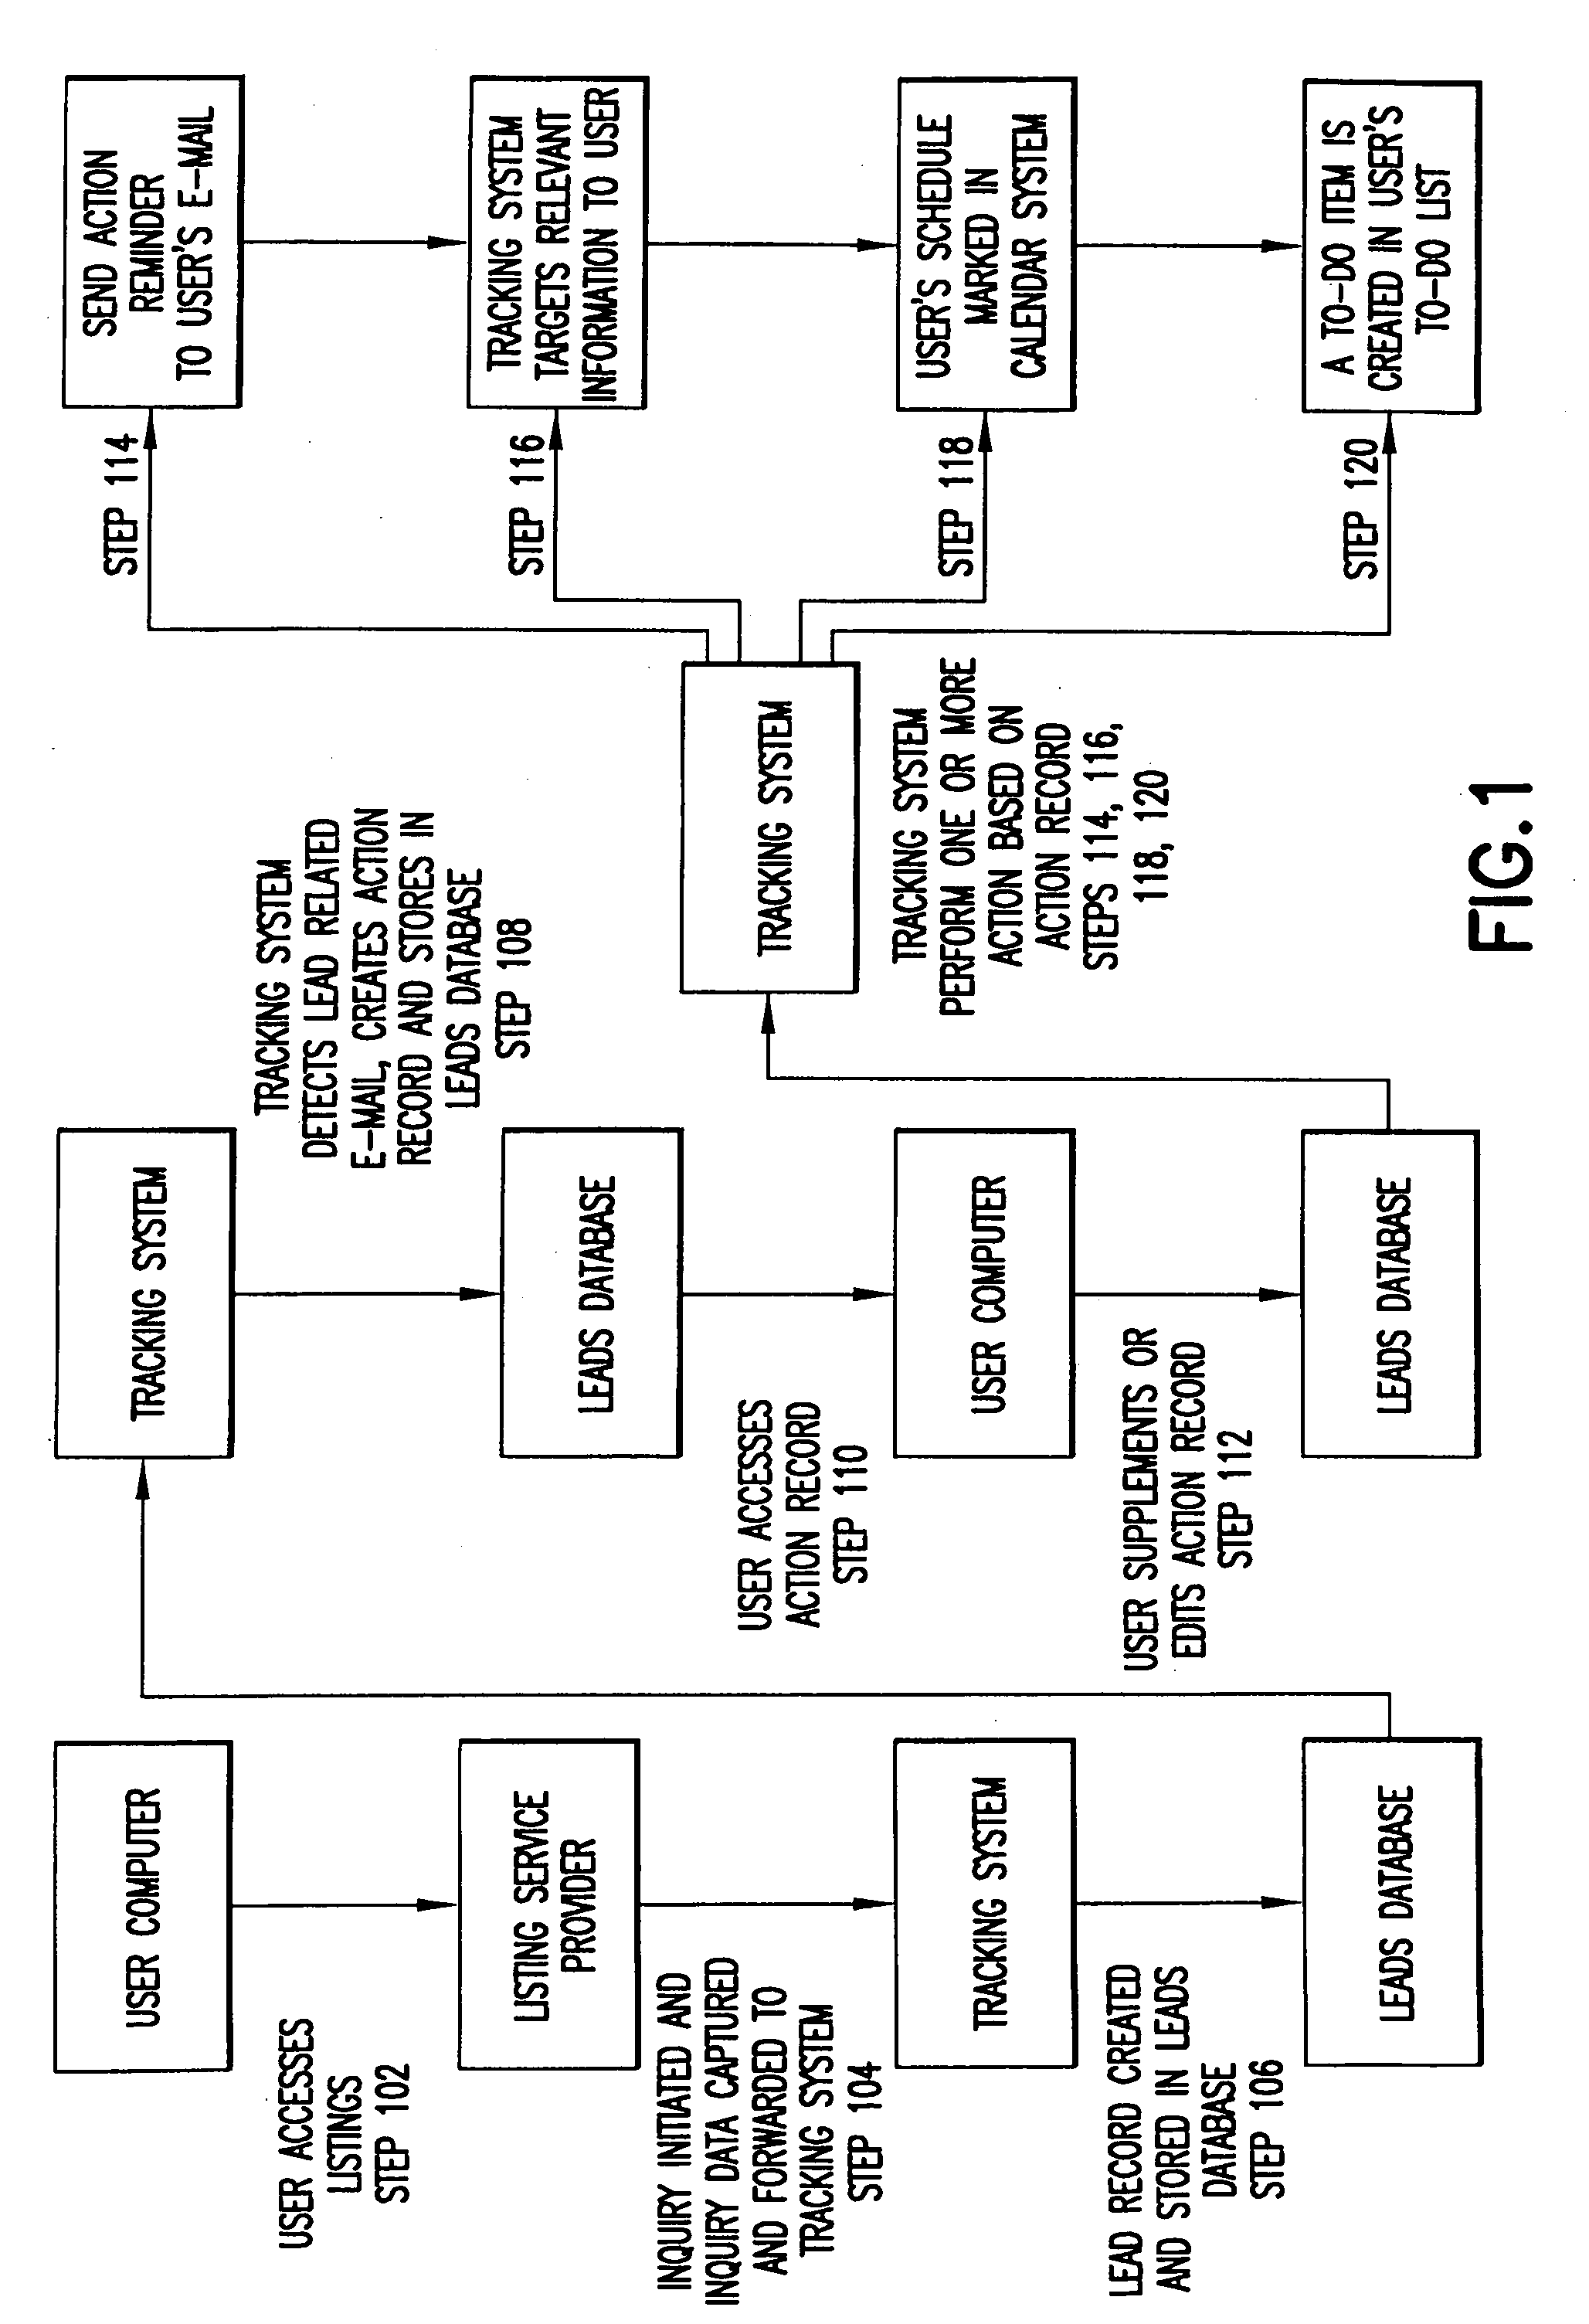 Listing service tracking system and method for tracking a user's interaction with a listing service